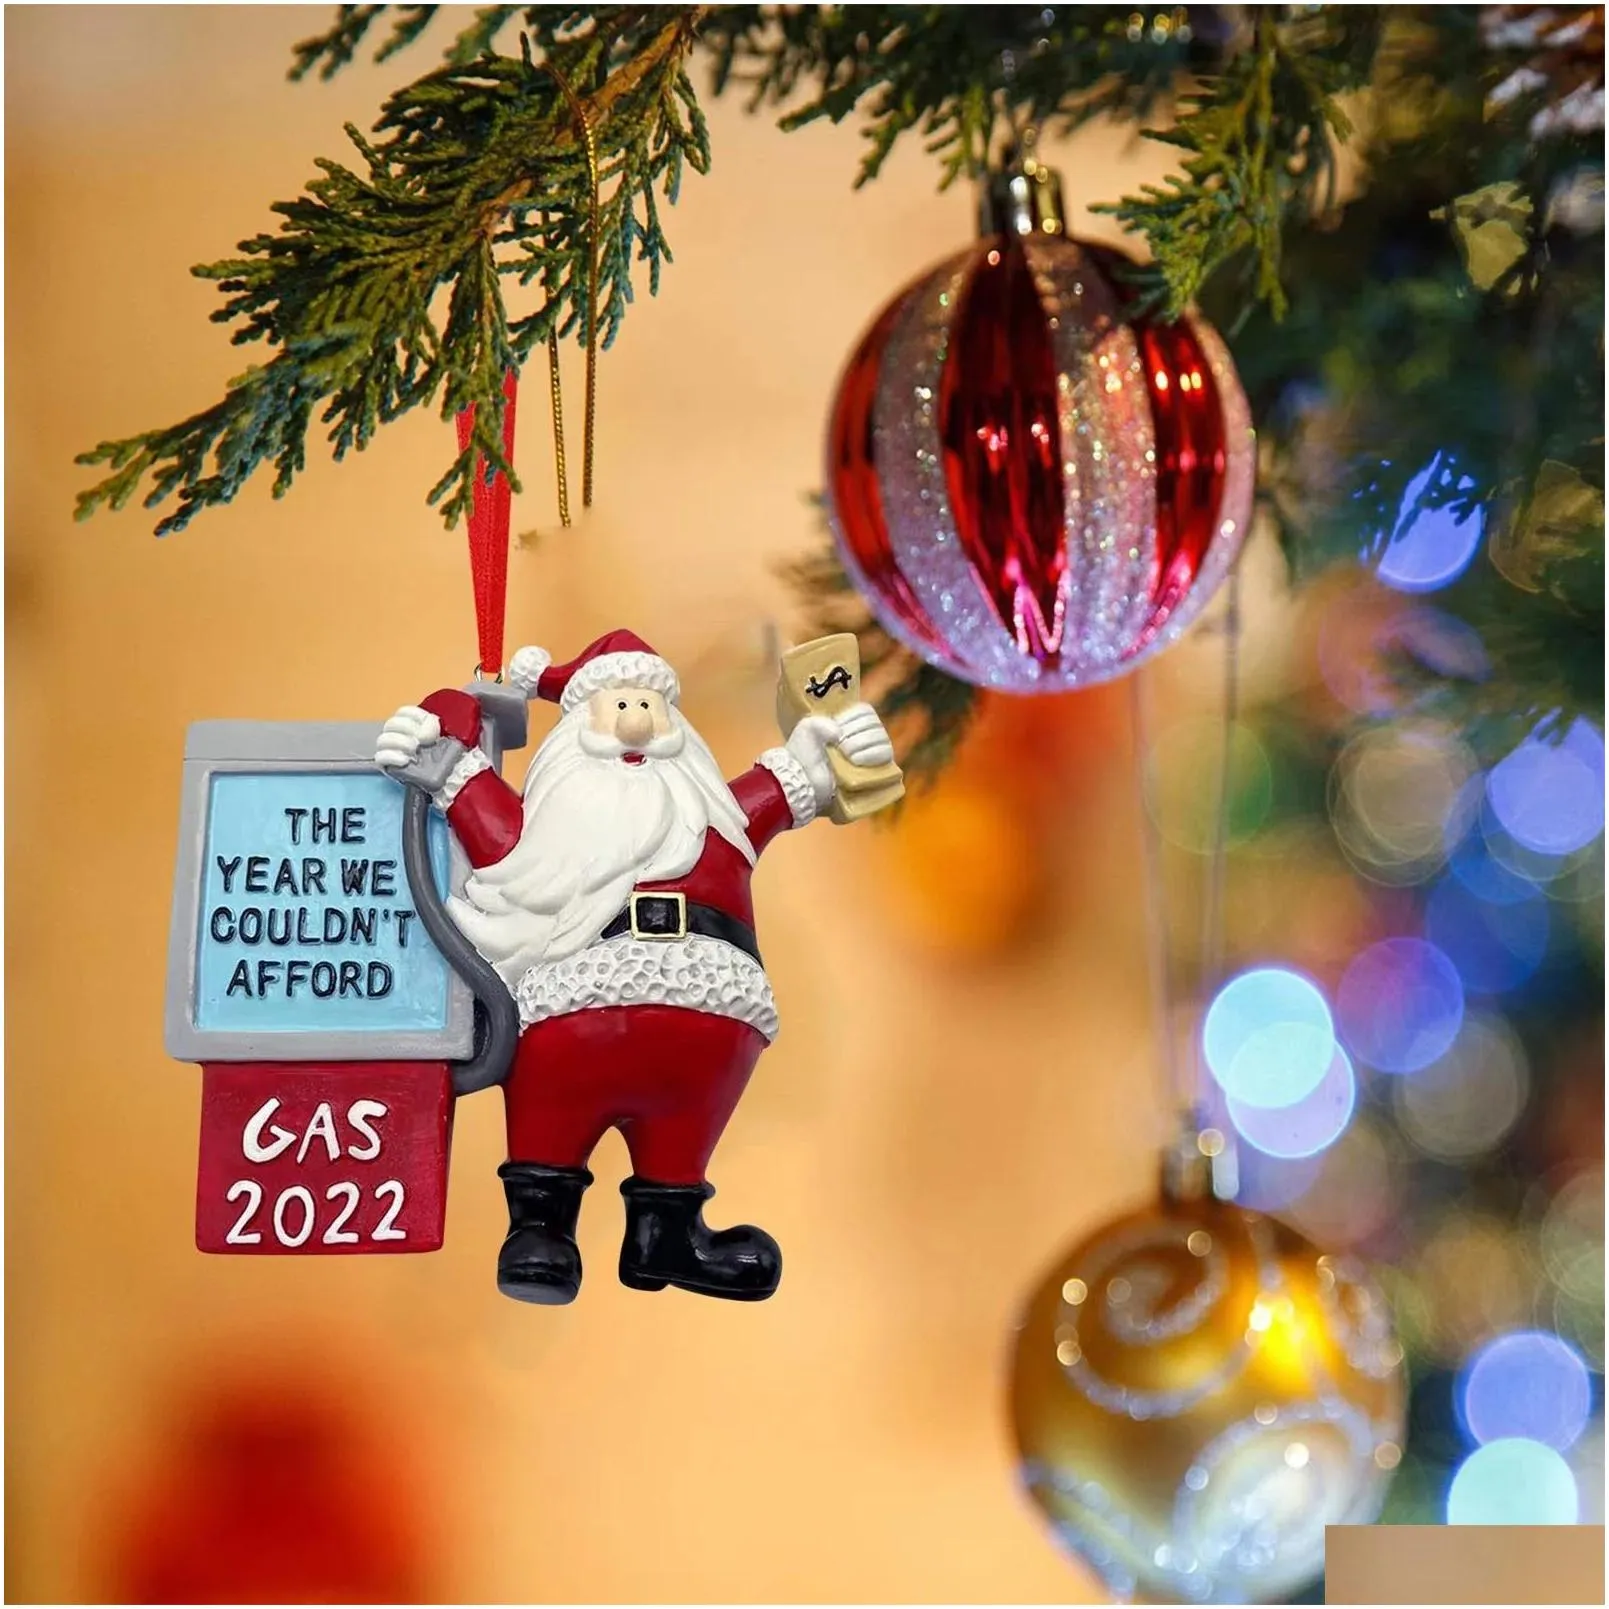 funny xmas santa claus ornaments the year we couldnt afford gas 2022 new year christmas tree hanging pendant decoration